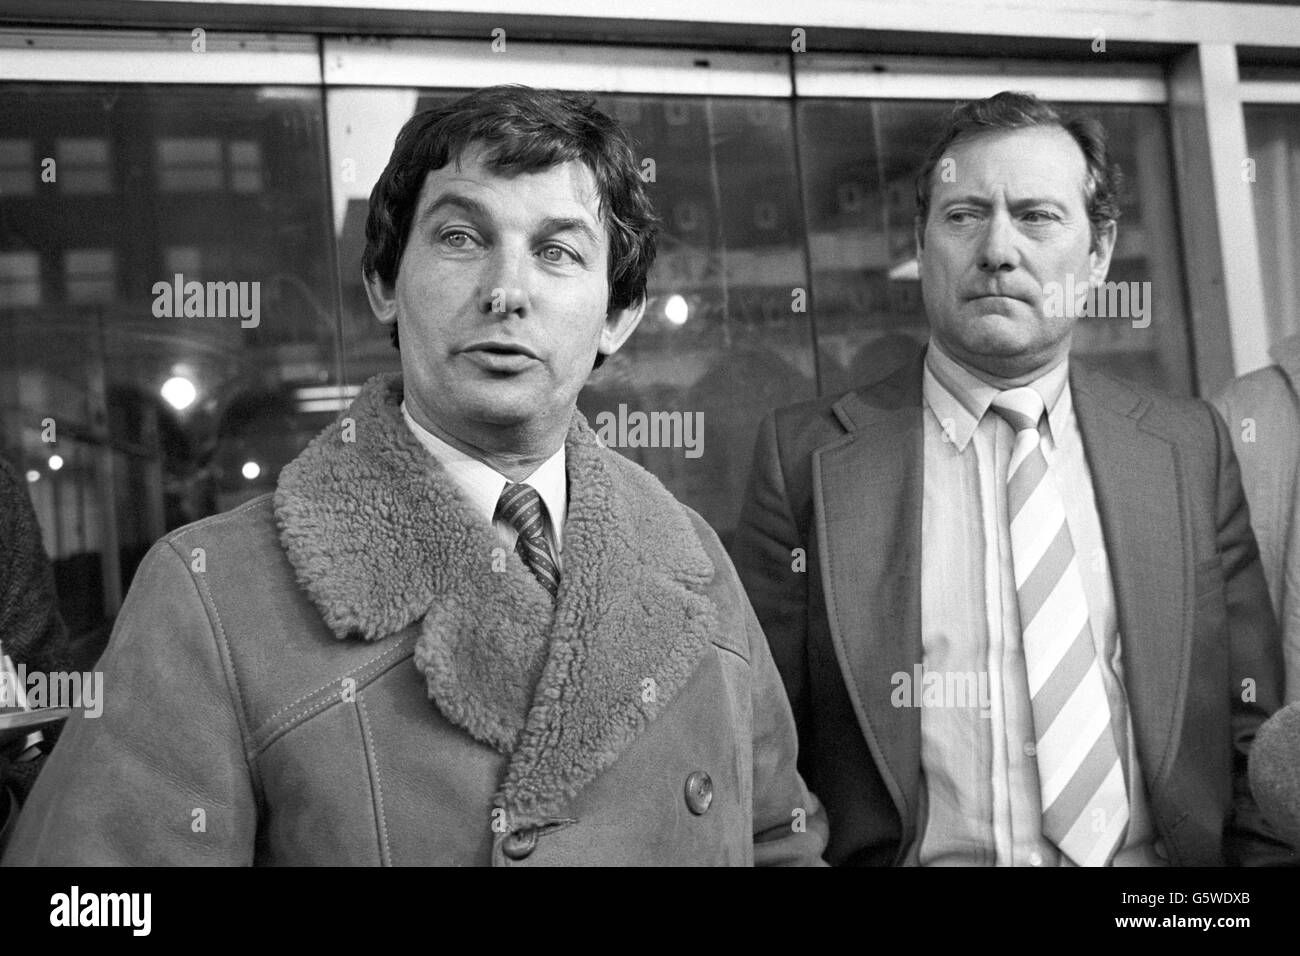 Luton Town executive John Smith (left) and Millwall chief executive Tony Shaw leave the Department of the Environment in London. They met with Sports Minister Neil MacFarlane to discuss the violent clashes at Kenilworth Road during an FA Cup tie between Luton and Millwall. Stock Photo